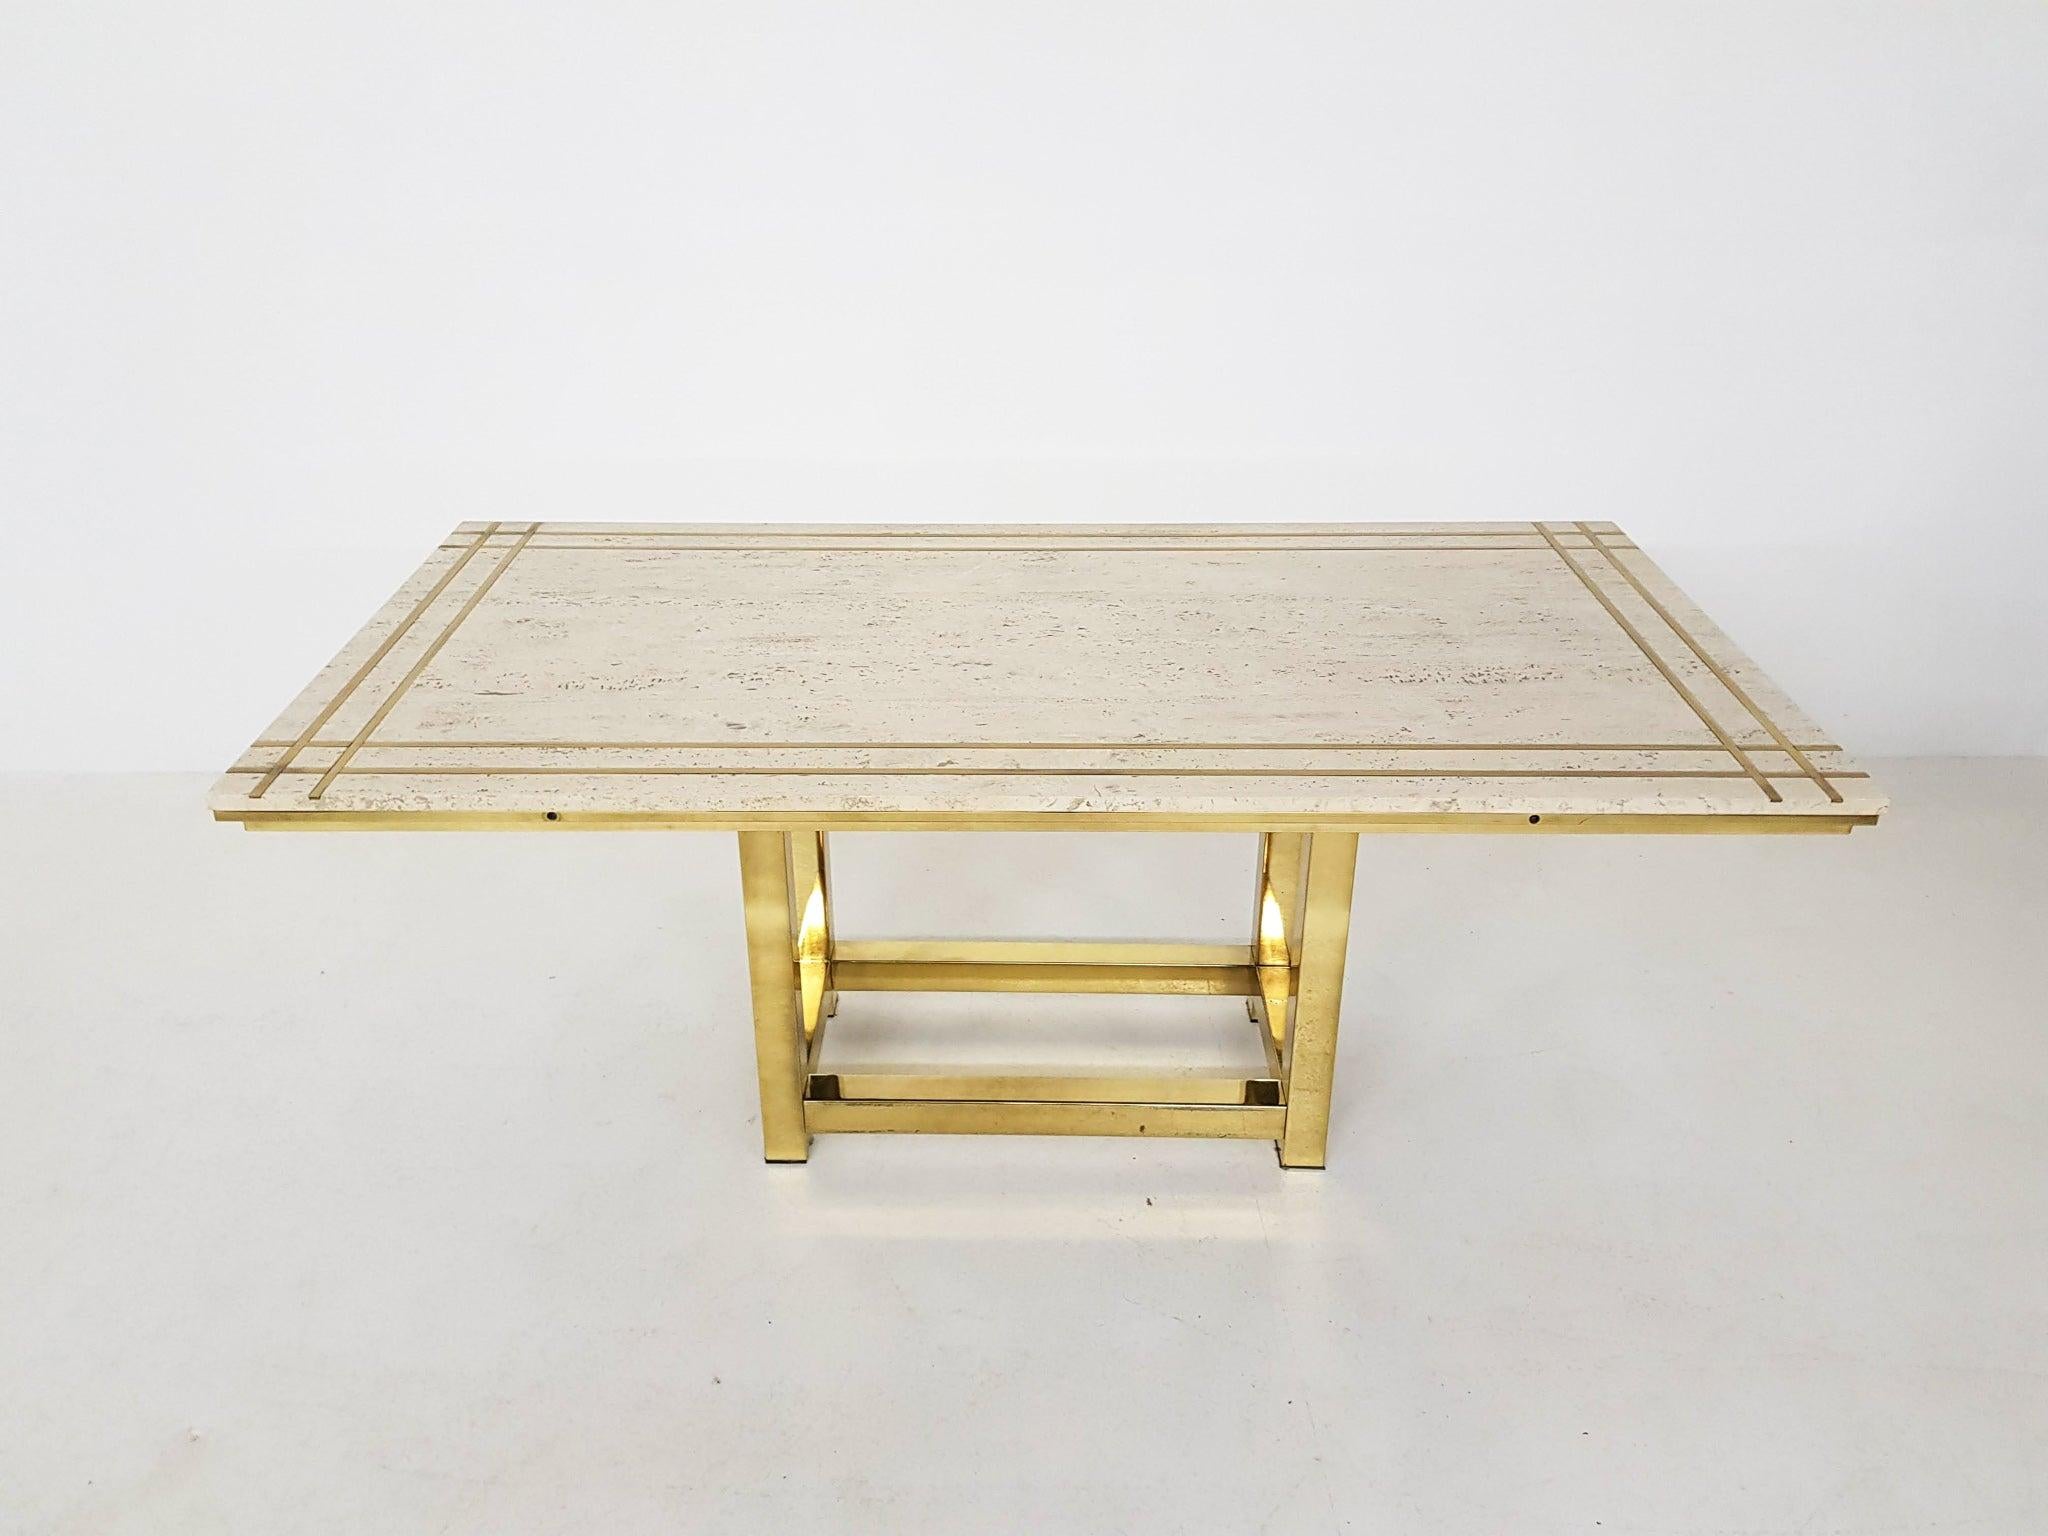 High-end travertine, brass and gold plated metal dining table by Alain Delon.

An impressive dining table made of the most beautiful travertine with a cross shaped brass inlay. The table rests on a gold plated metal base. It has place for six